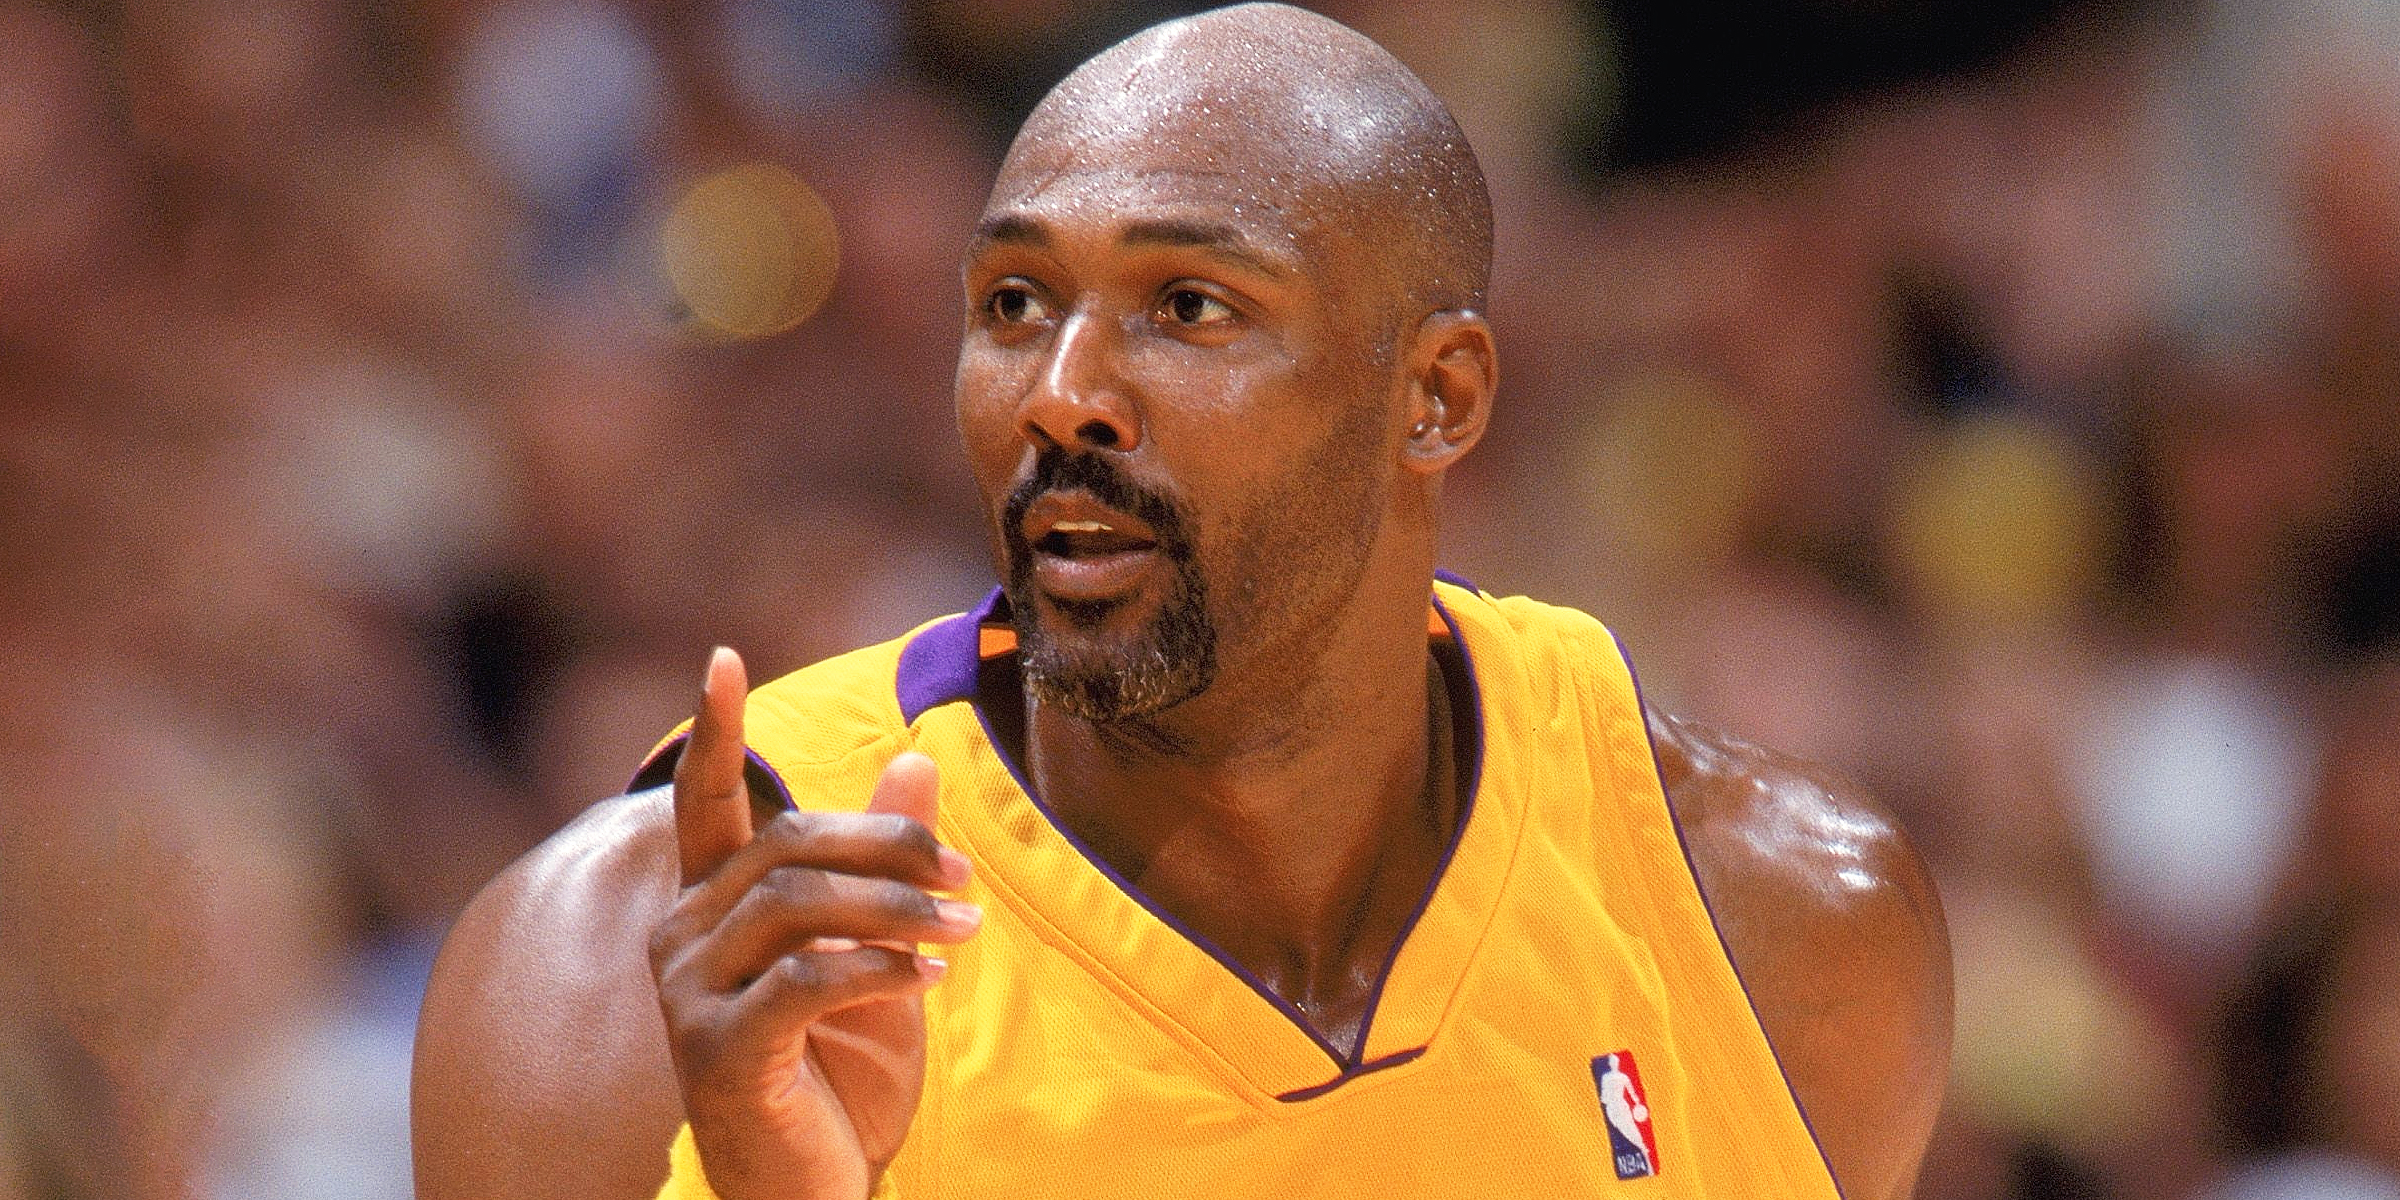 Karl Malone | Source: Getty Images